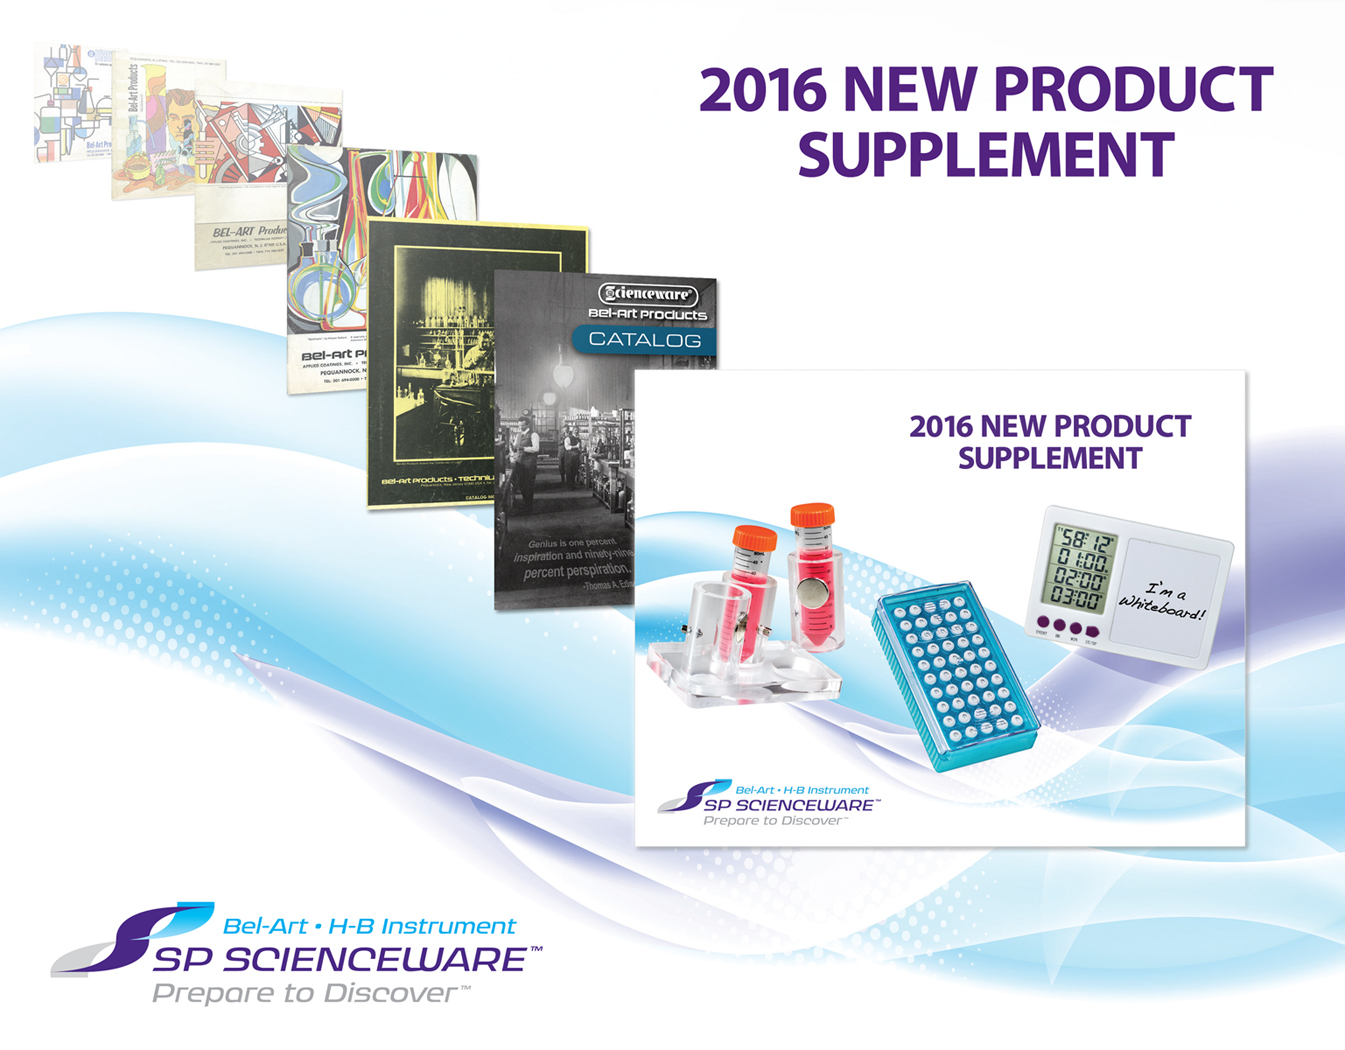 View the 2016 New Product Supplement on Belart.com/Catalogs